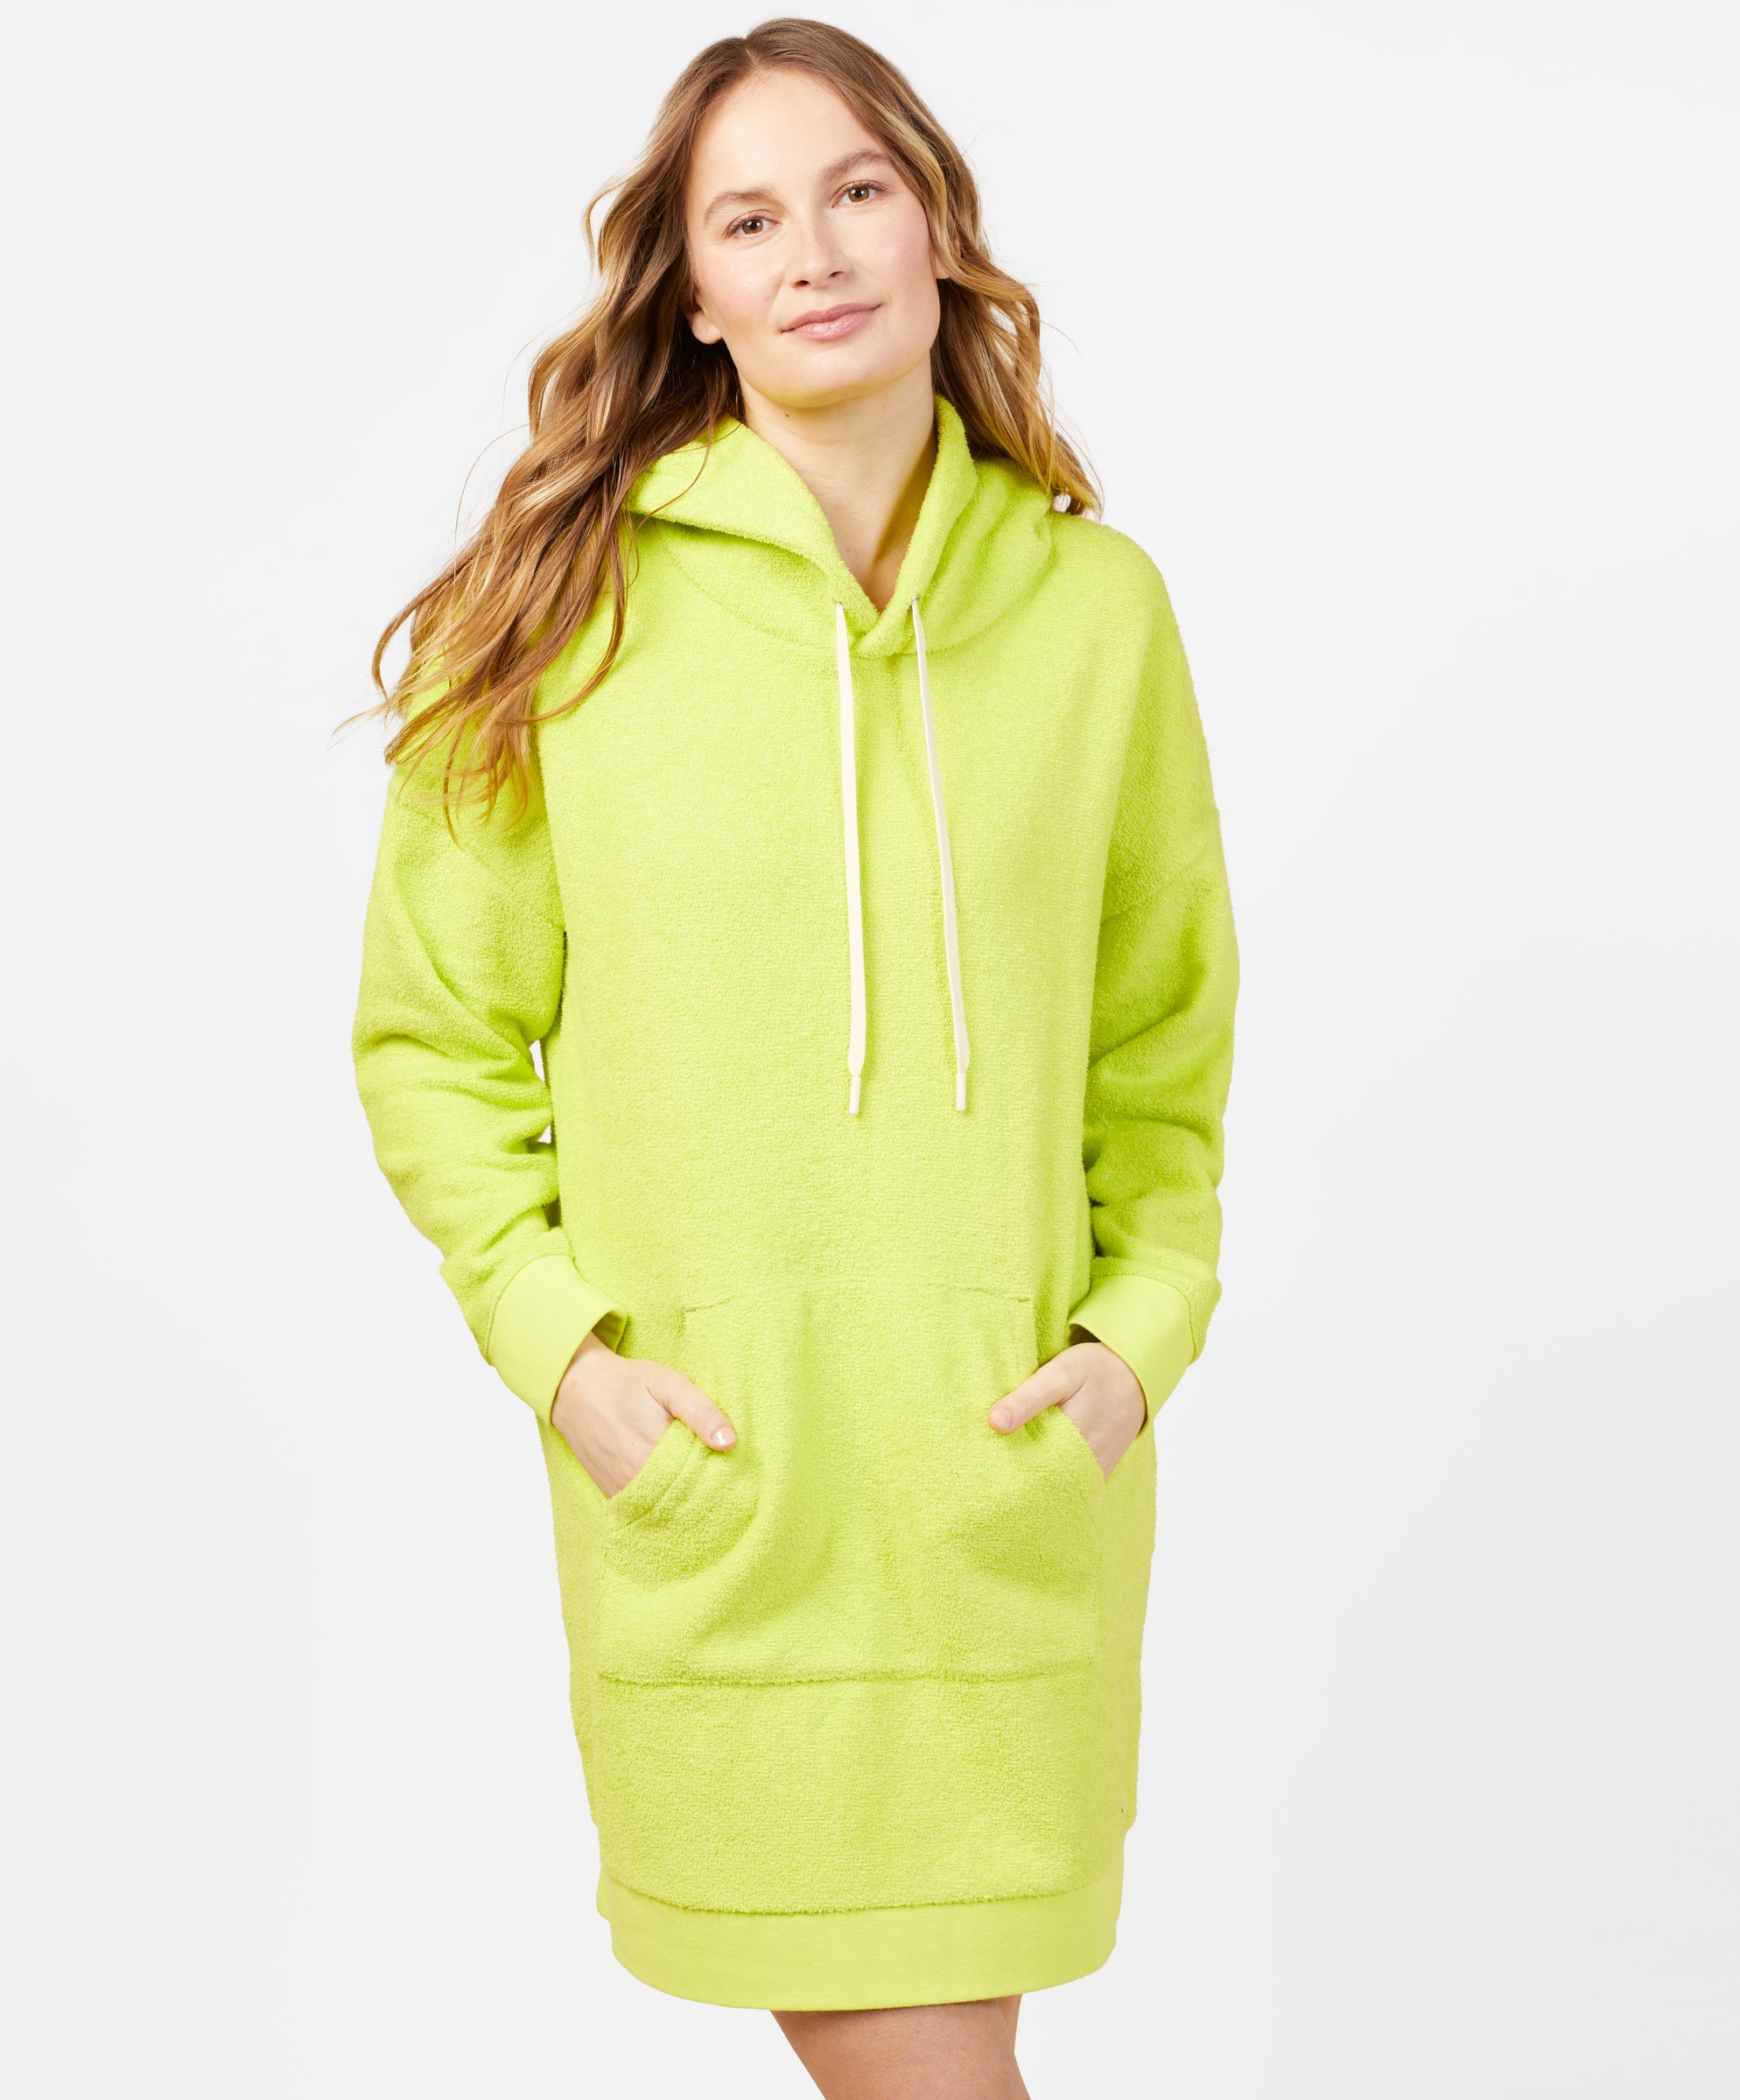 Hightide Hooded Dress | Outerknown - Outlet